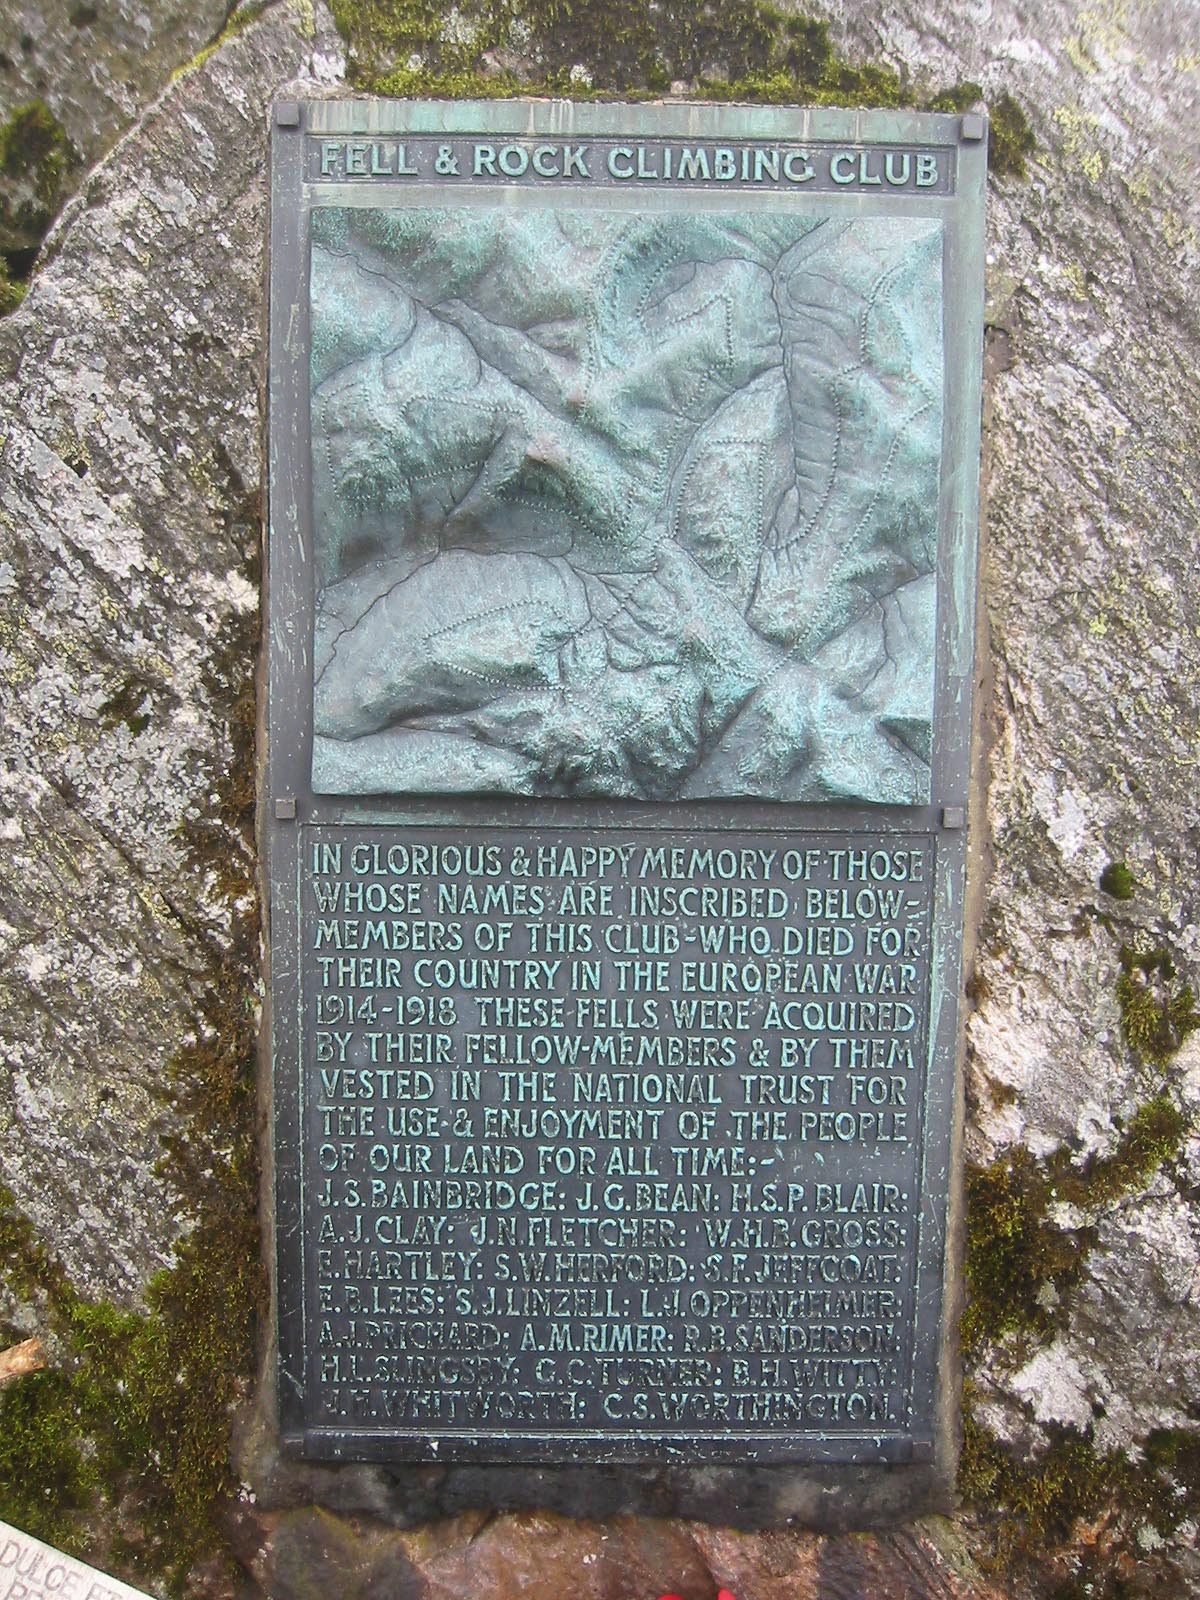 FRCC plaque on Great Gable